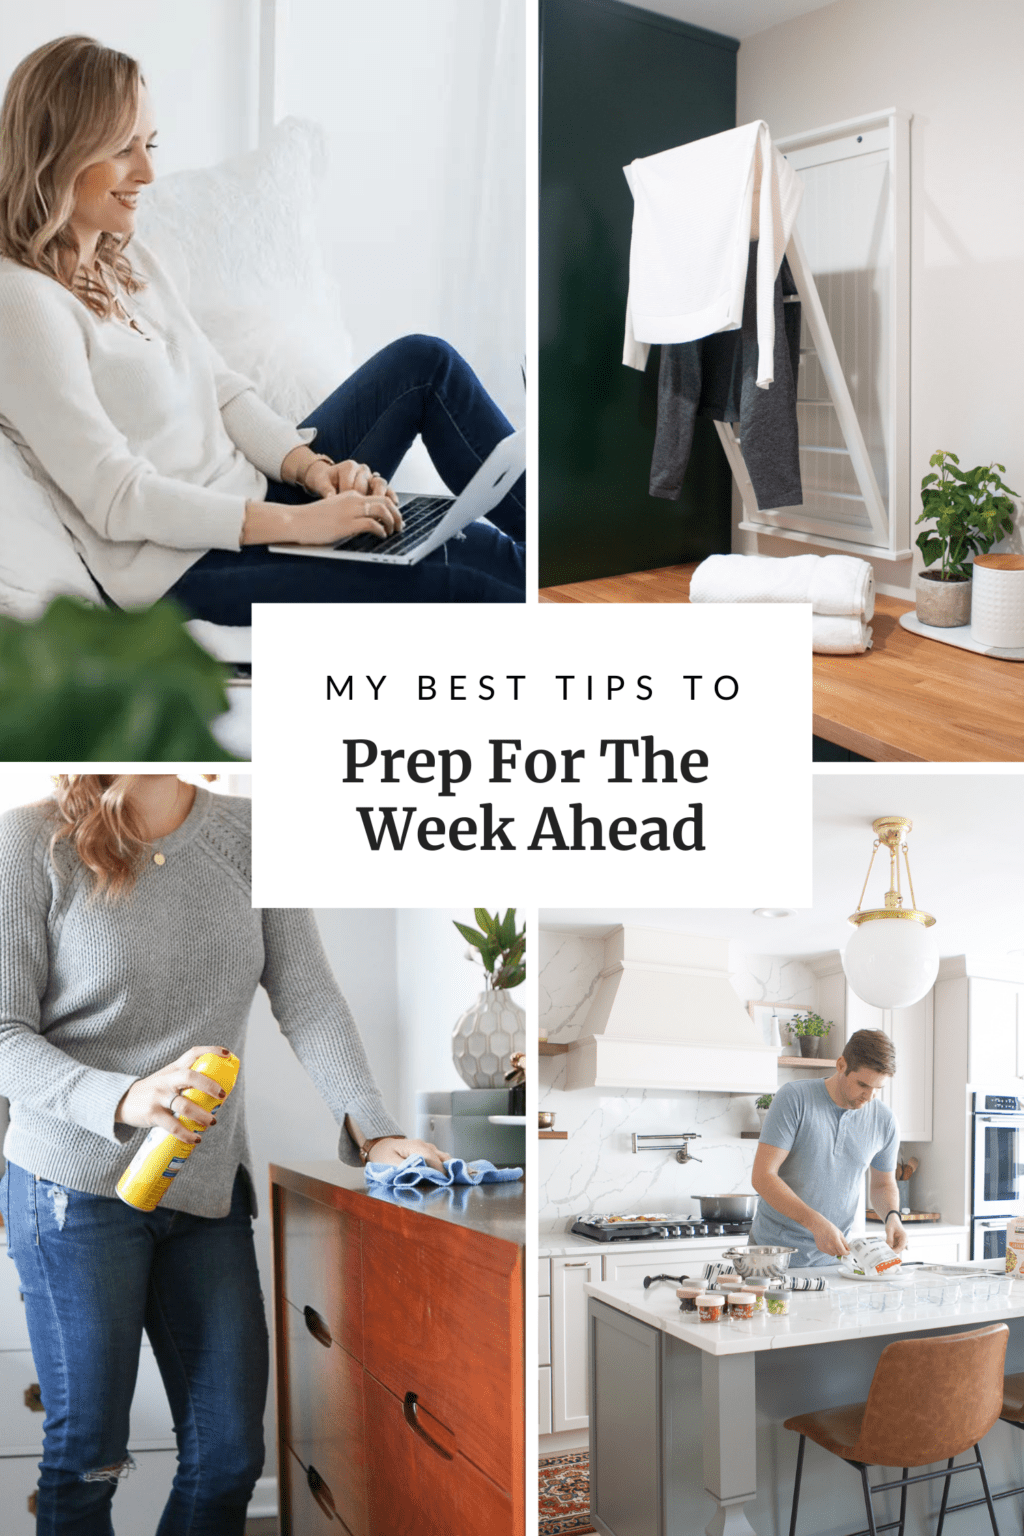 My best tips to prep for the week ahead